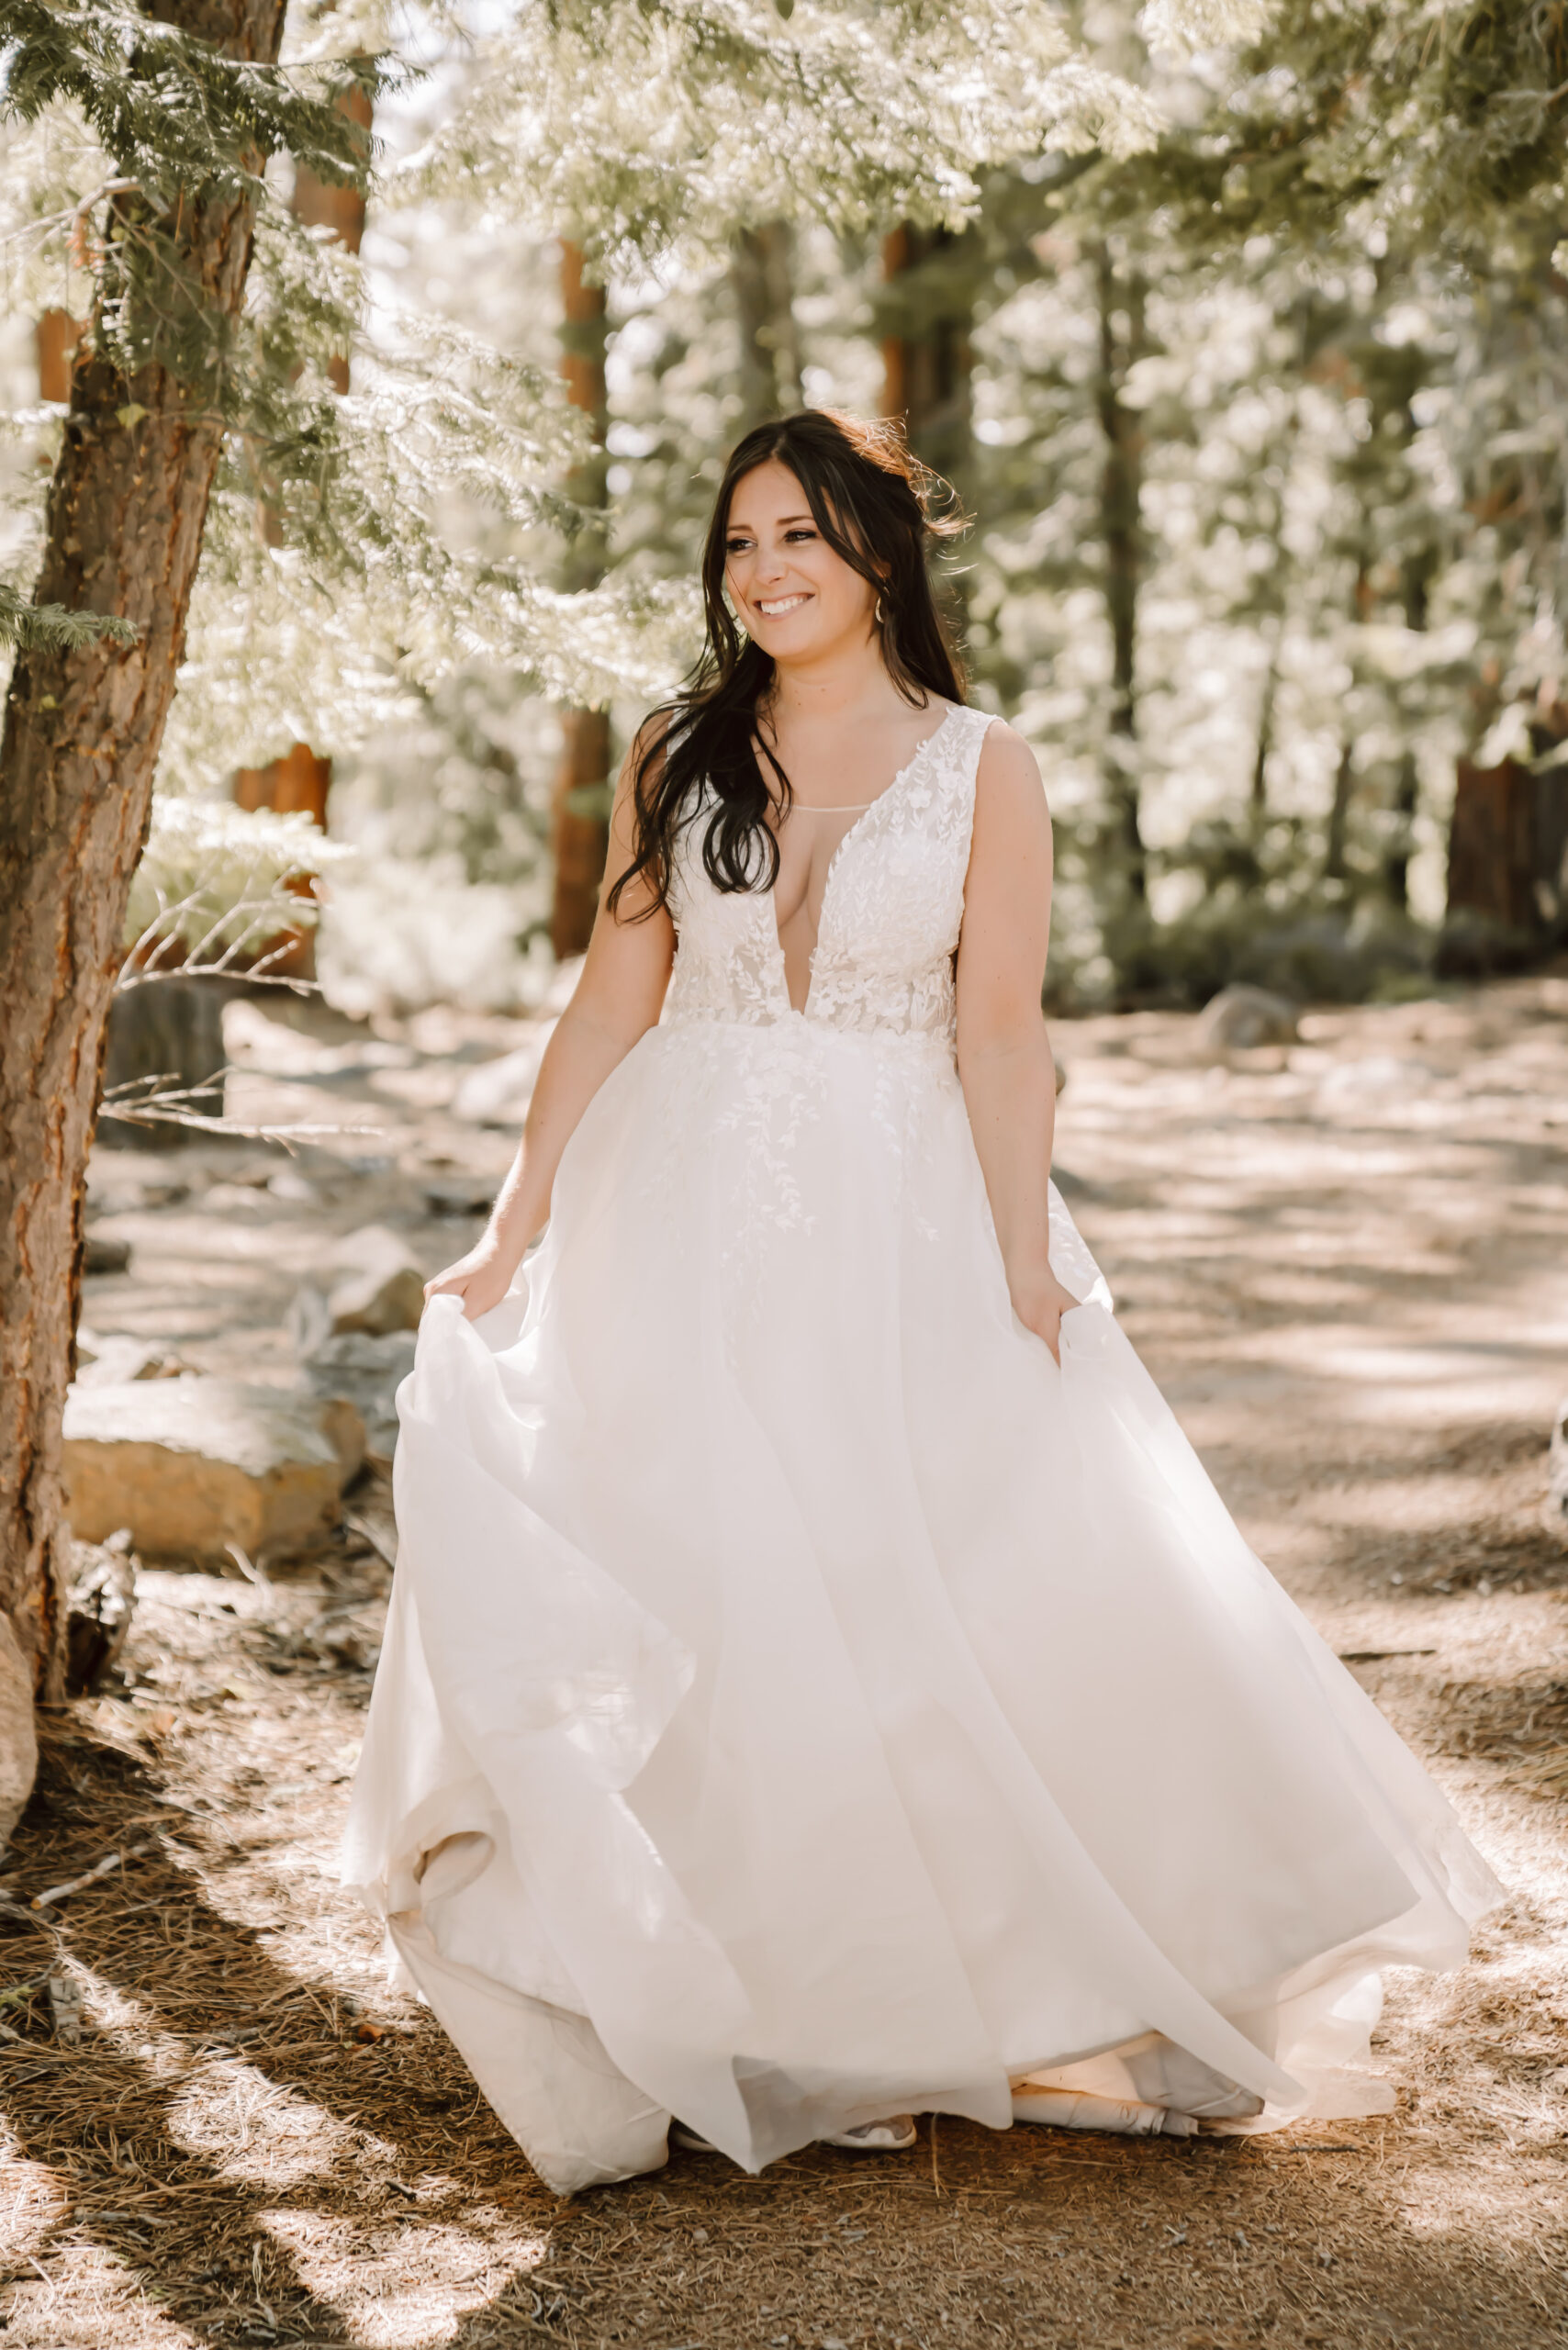 A bride swaying in her flowy elopement dress